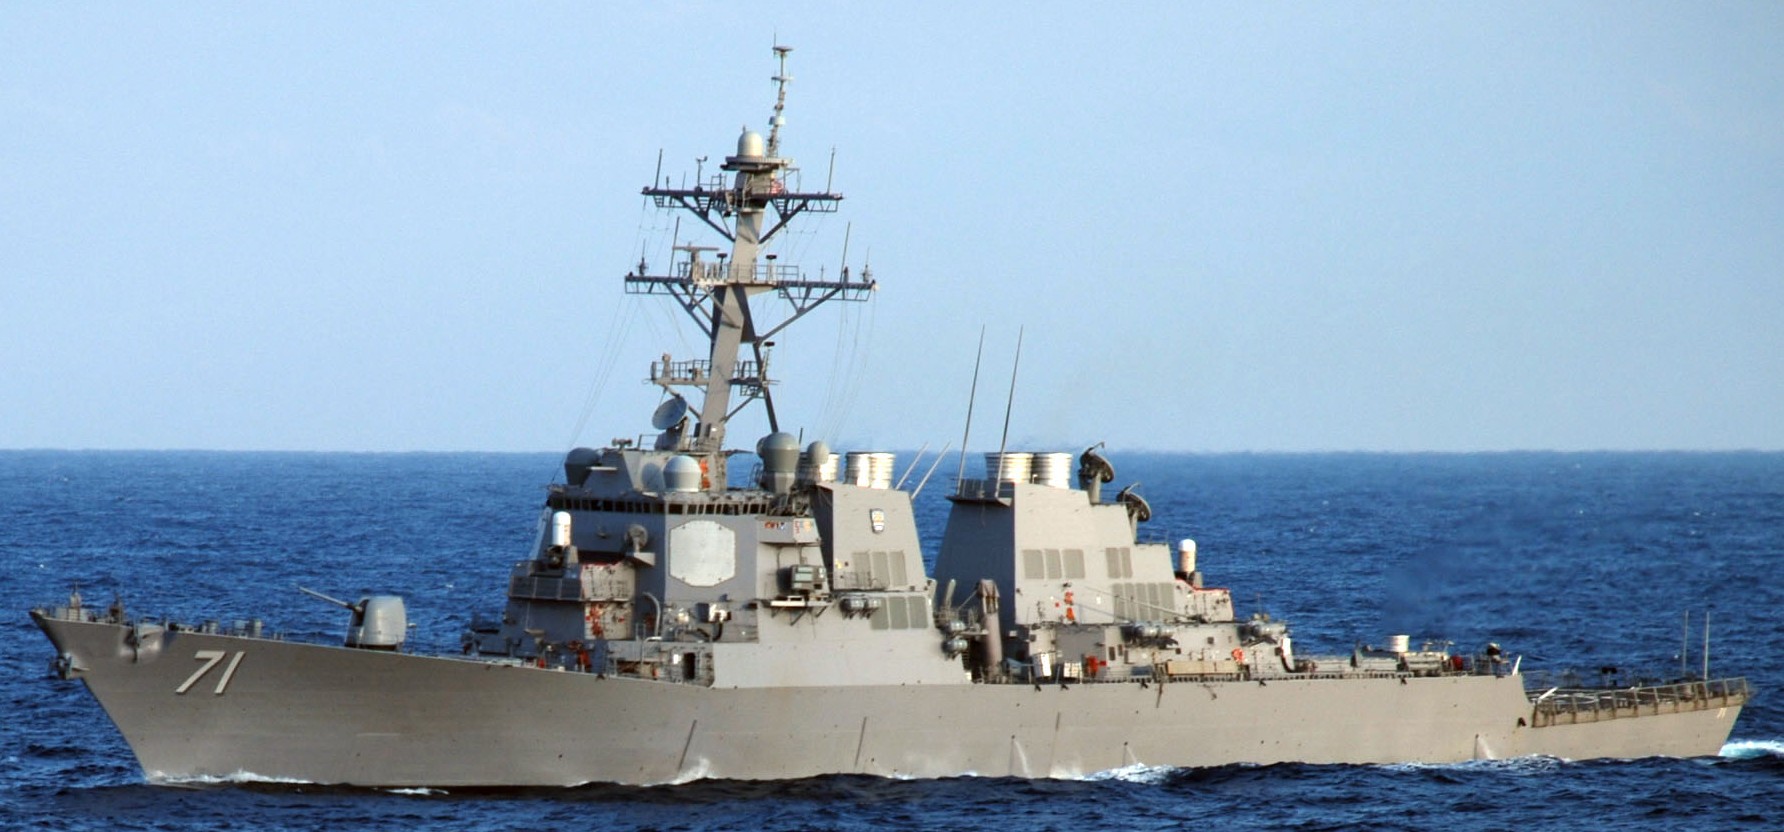 ddg-71 uss ross guided missile destroyer arleigh burke class aegis bmd 87